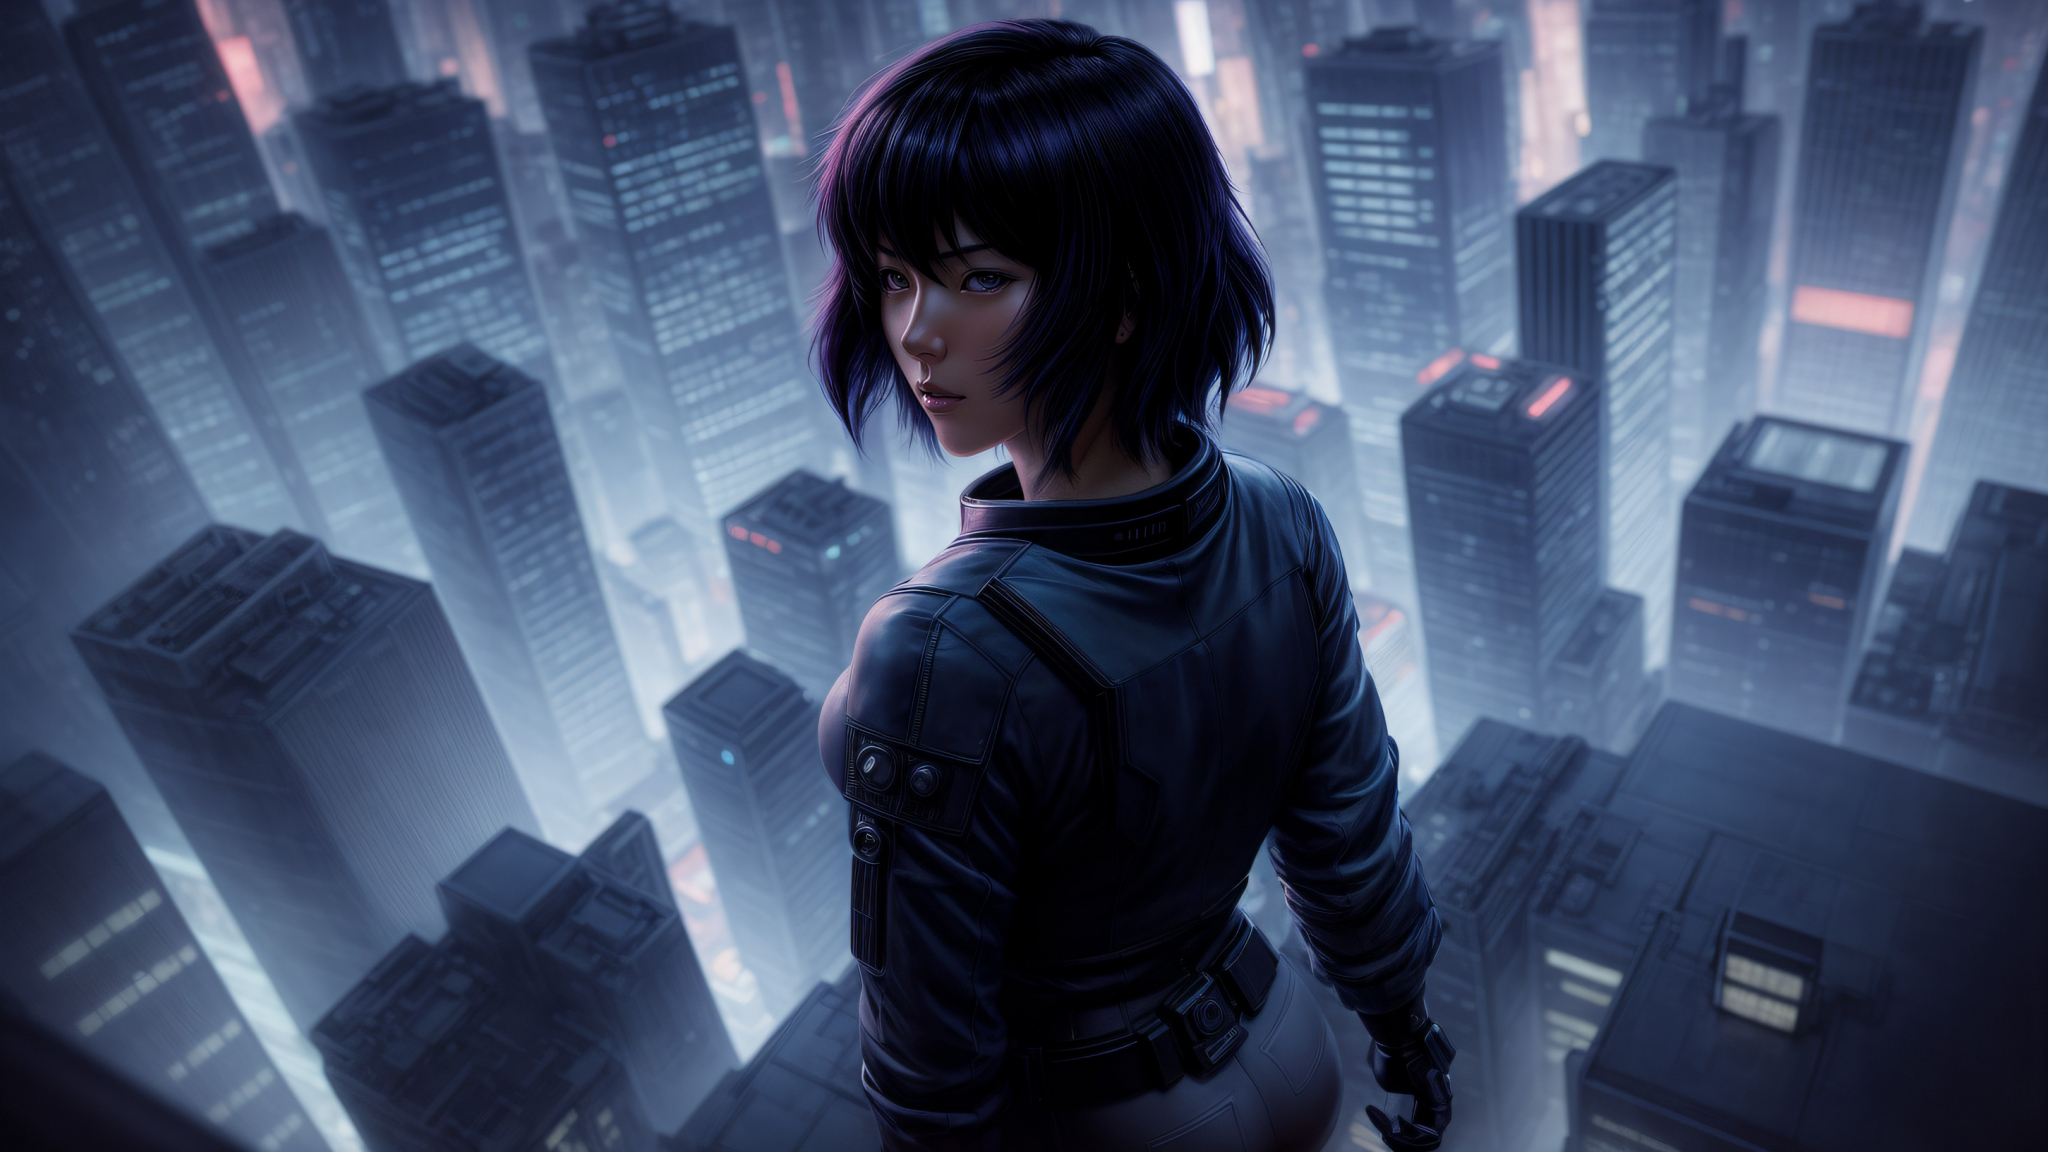 Beautiful girl, Ghost in the Shell, anime art, 2048x1152 wallpaper